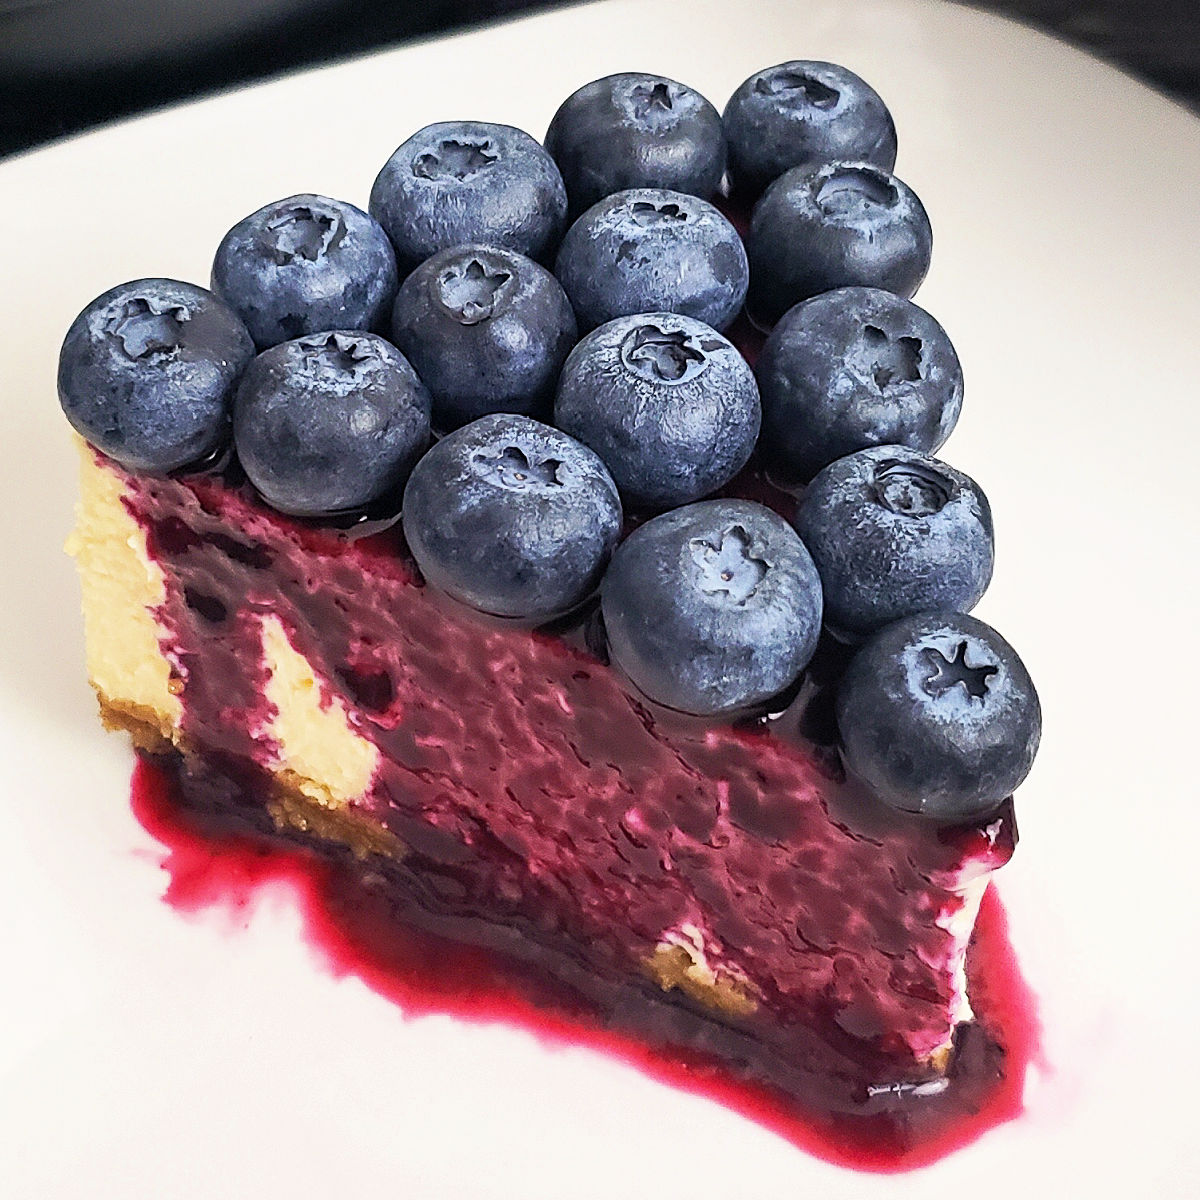 Slice of New York Style cheesecake topped with blueberry syrup and fresh blueberries.